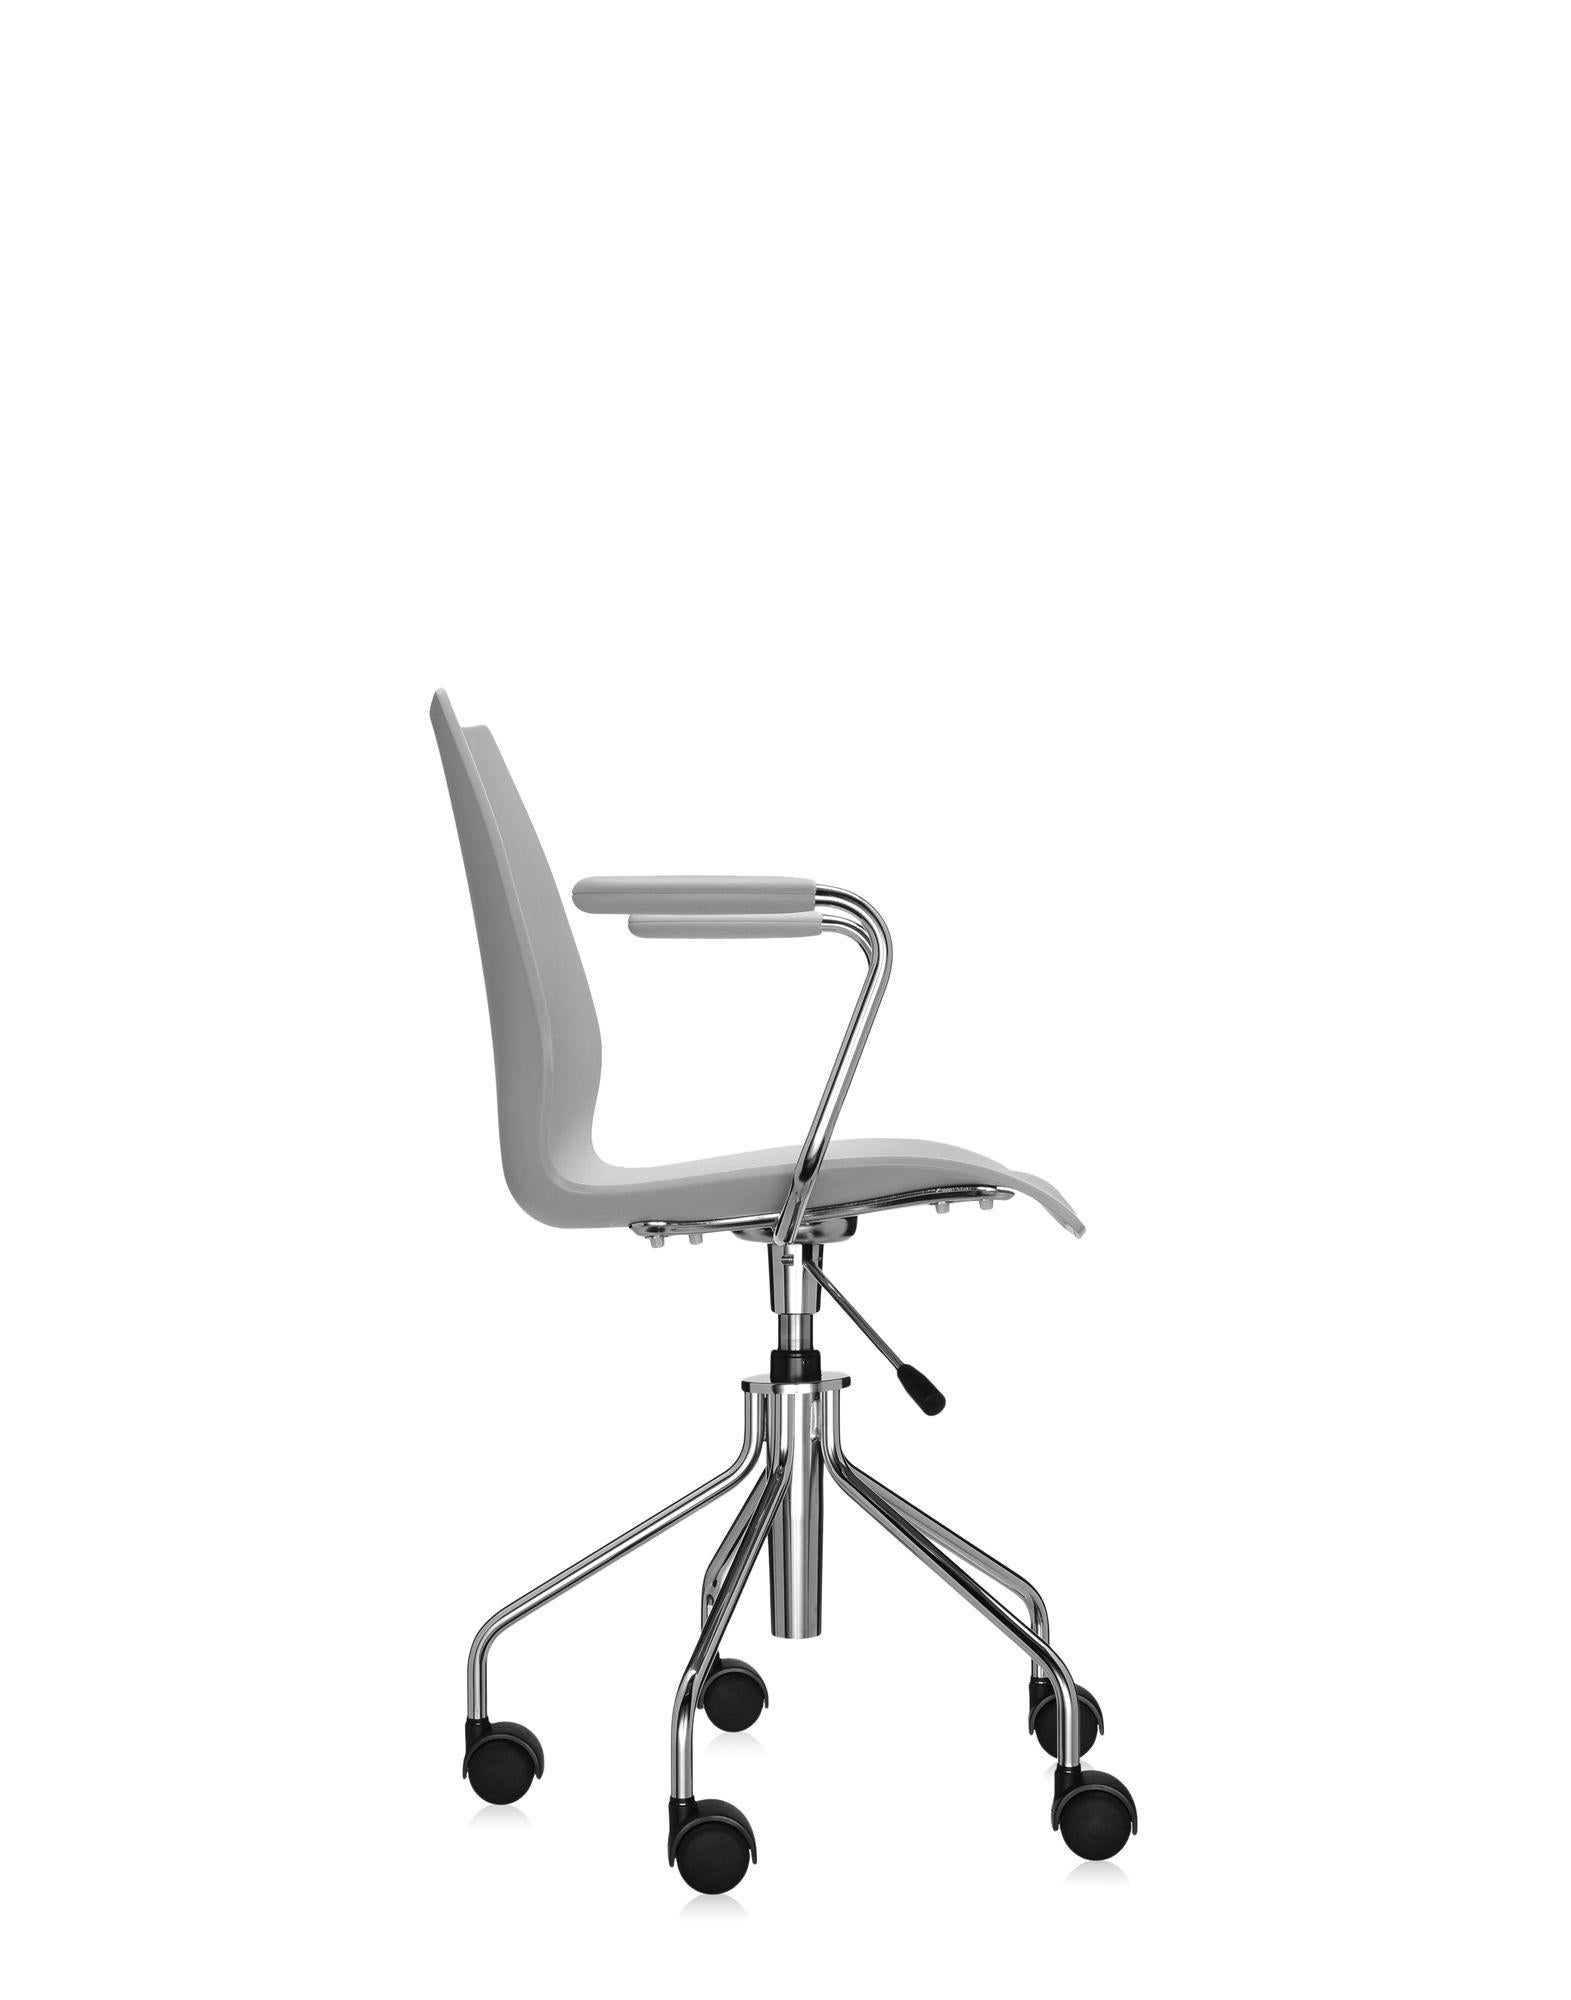 Kartell Maui Swivel Chair Adjustable in Pale Grey by Vico Magistretti 1